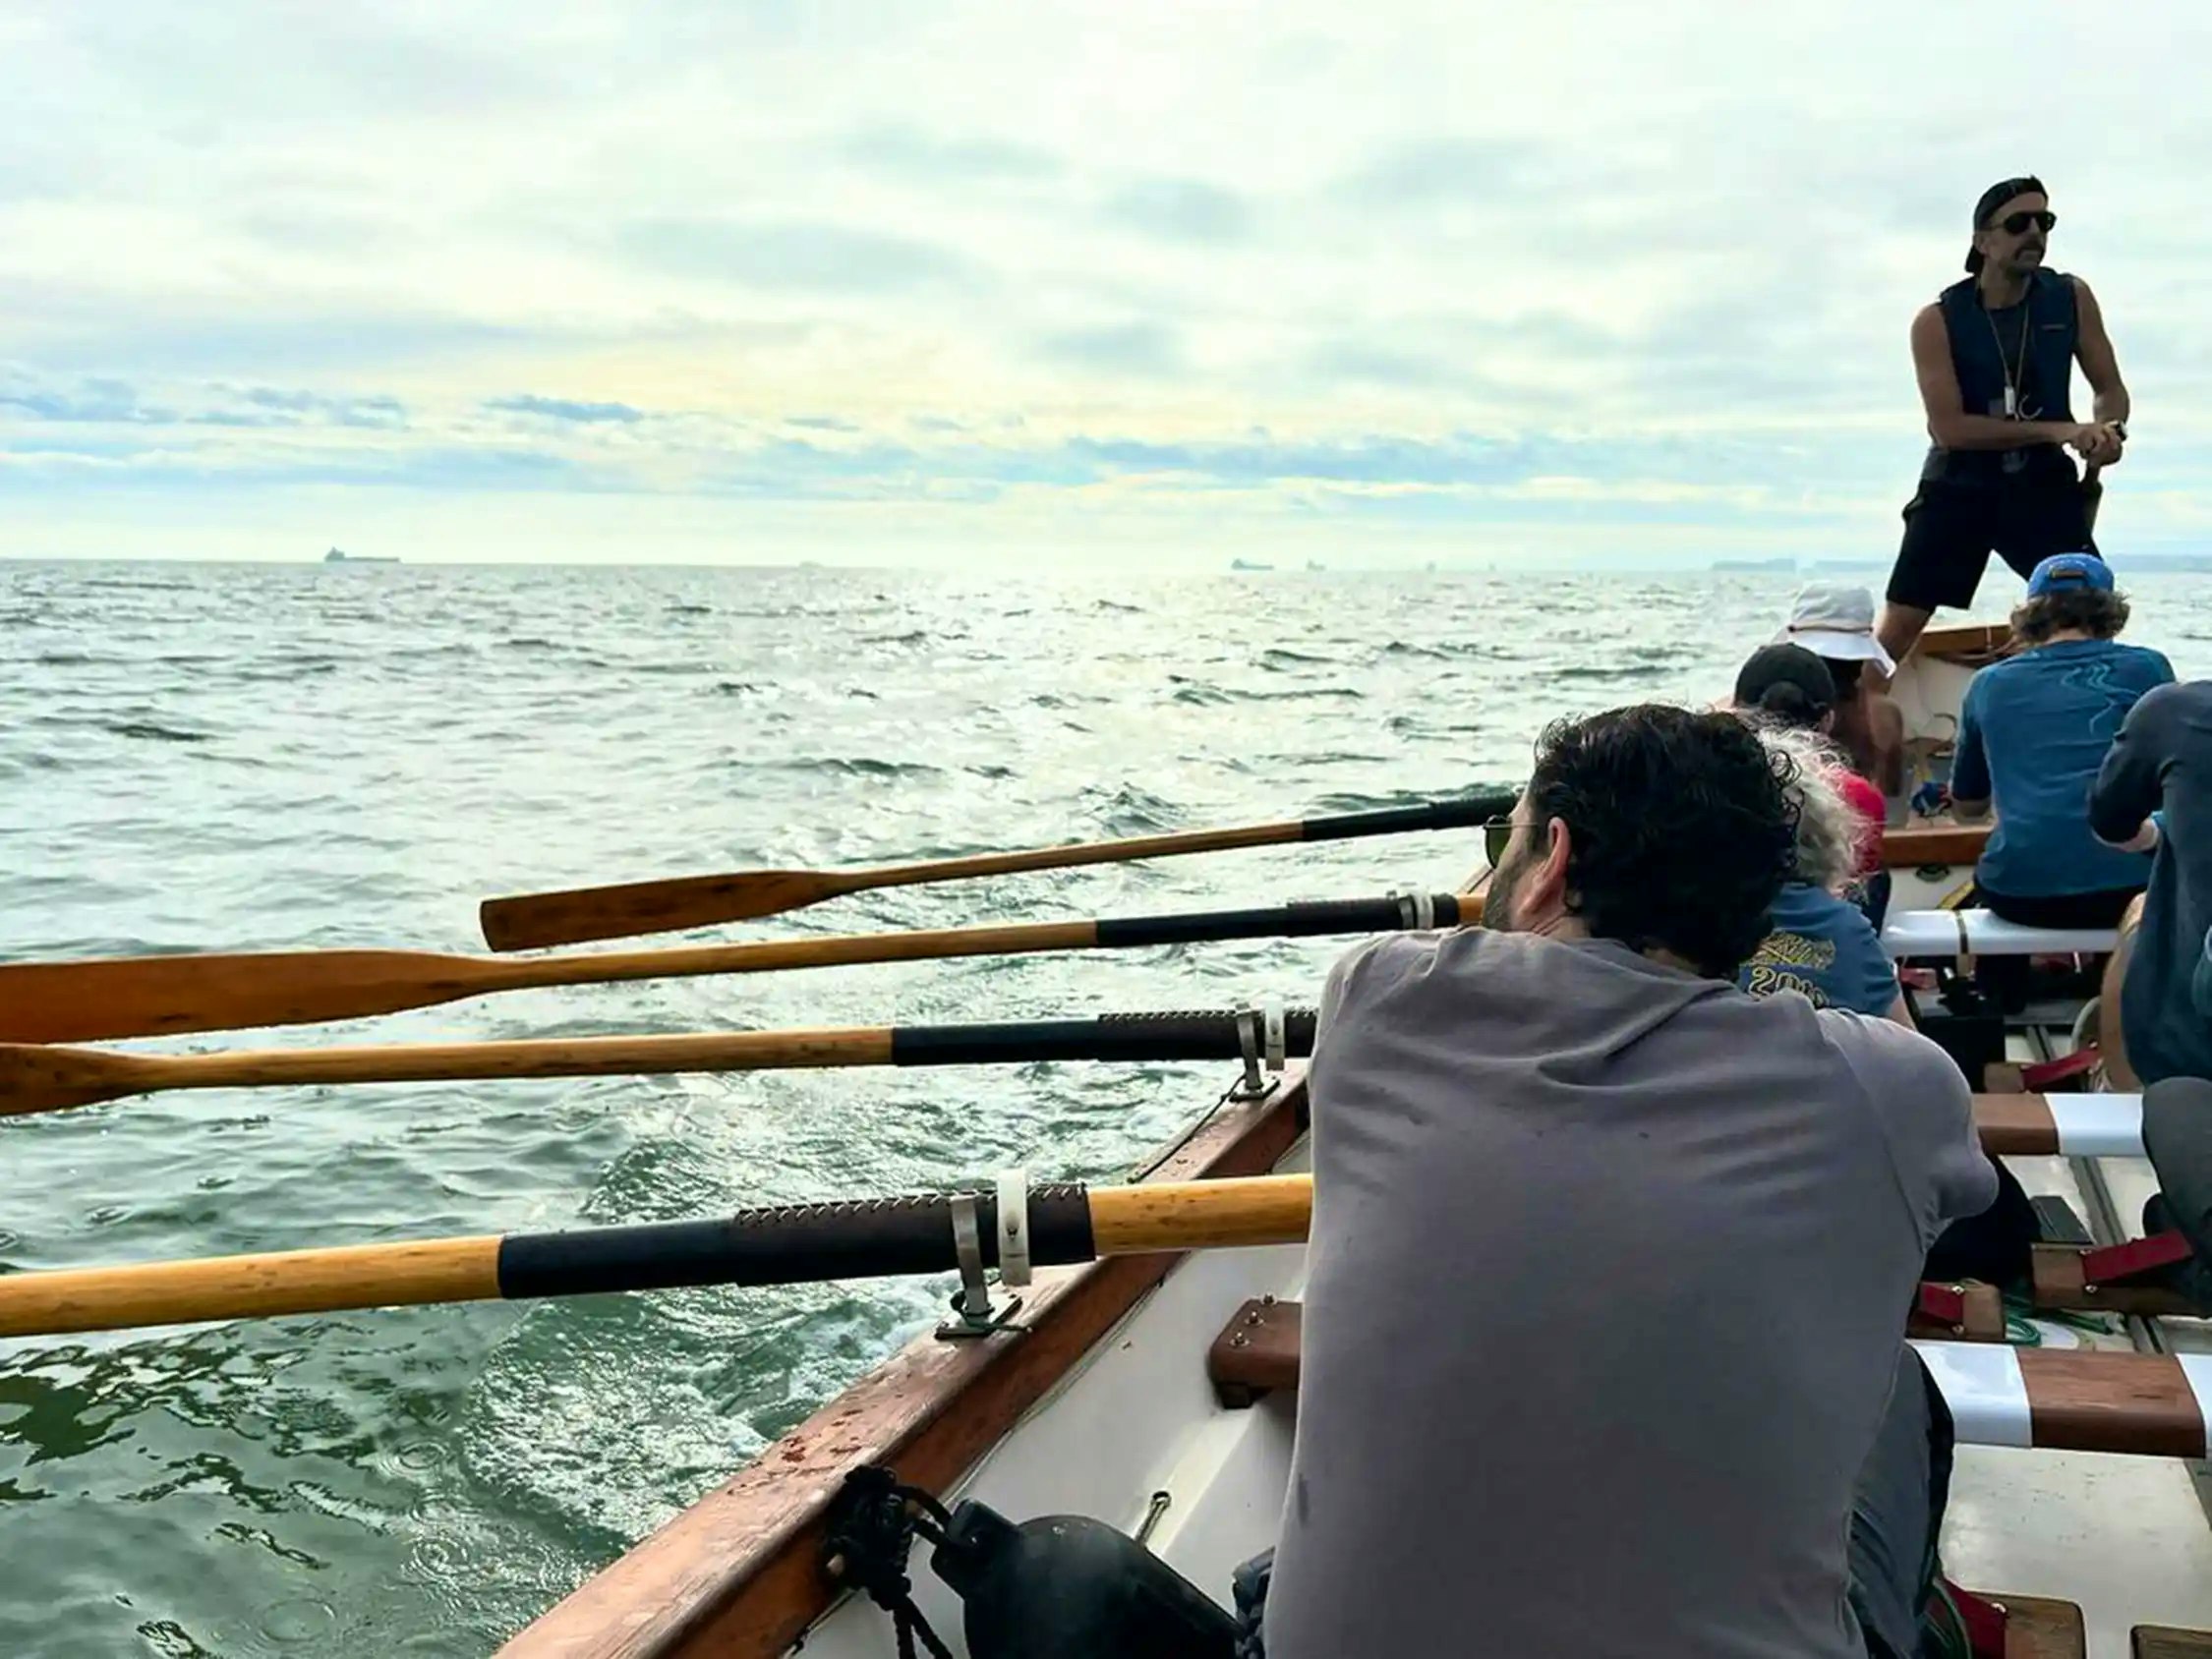 Rowing together on the bay